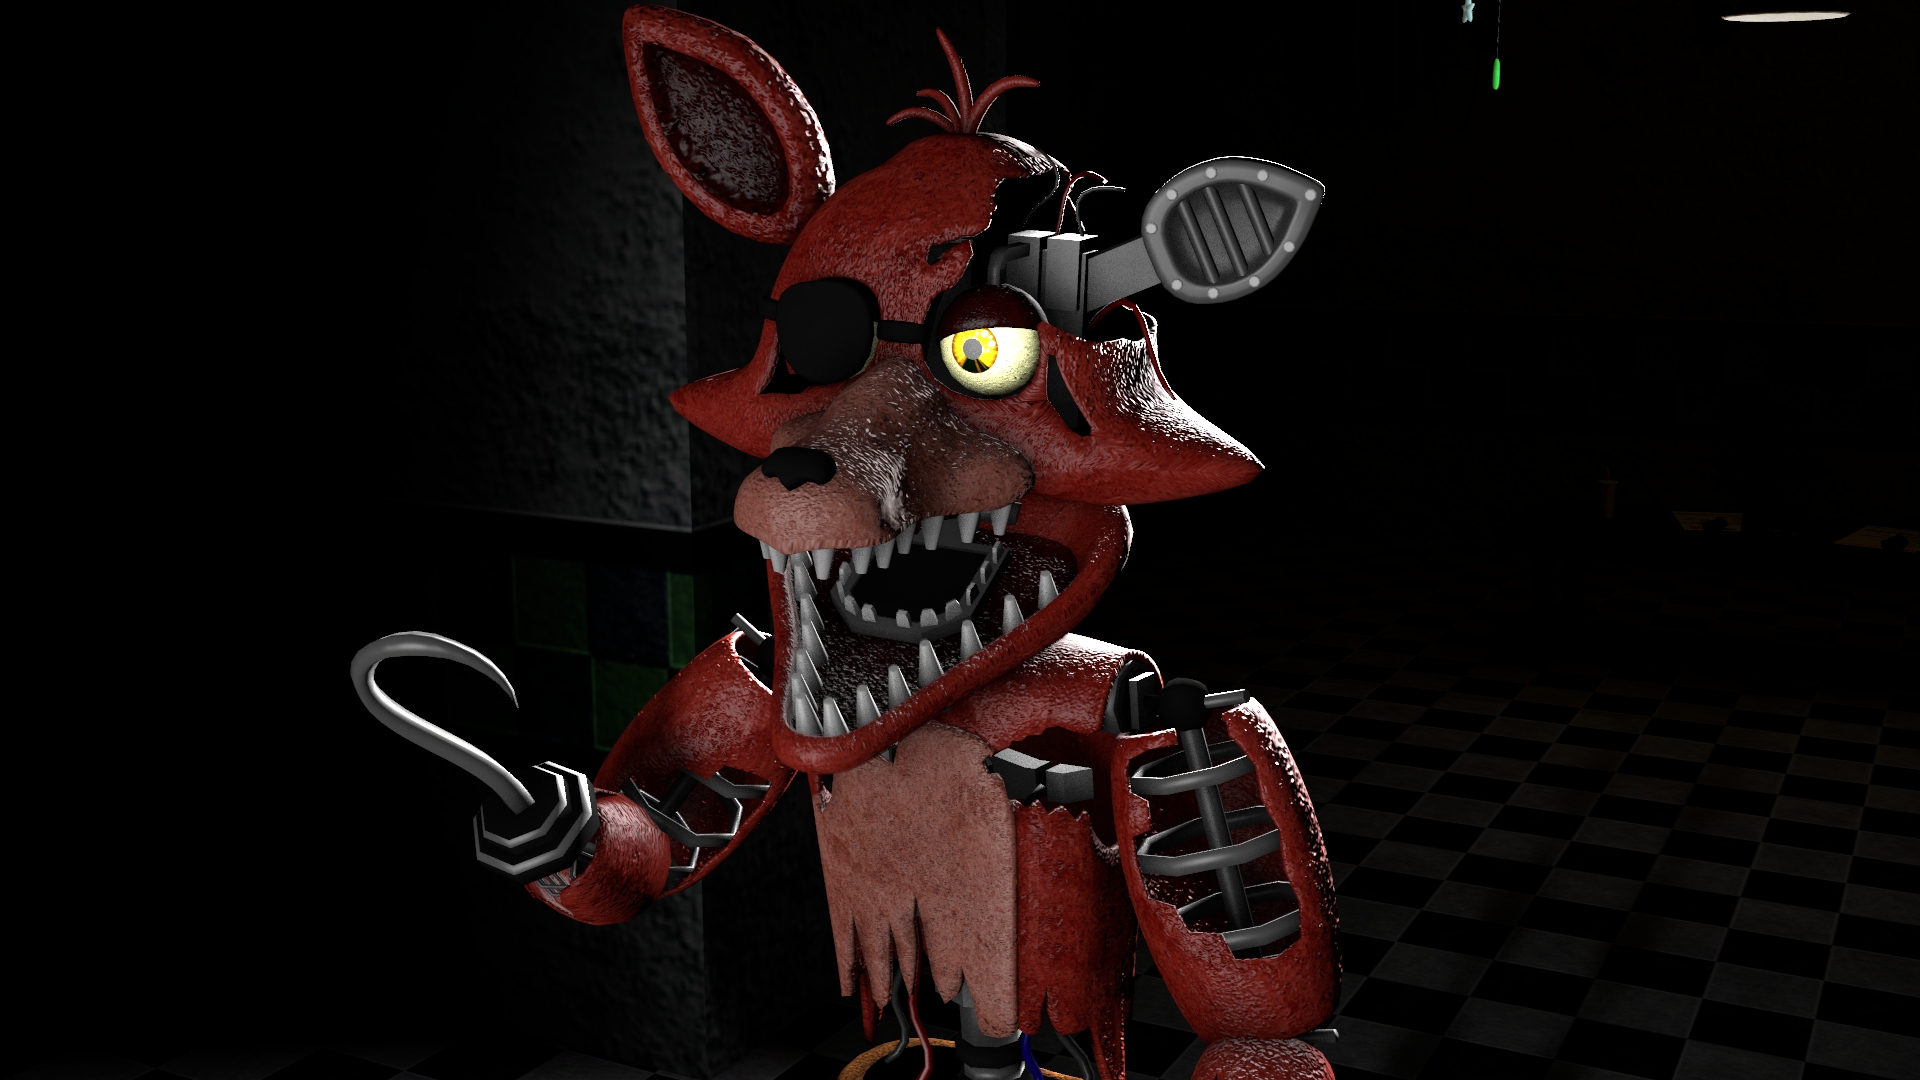 SFM) FNaF2 Withered Foxy by williamwee on DeviantArt